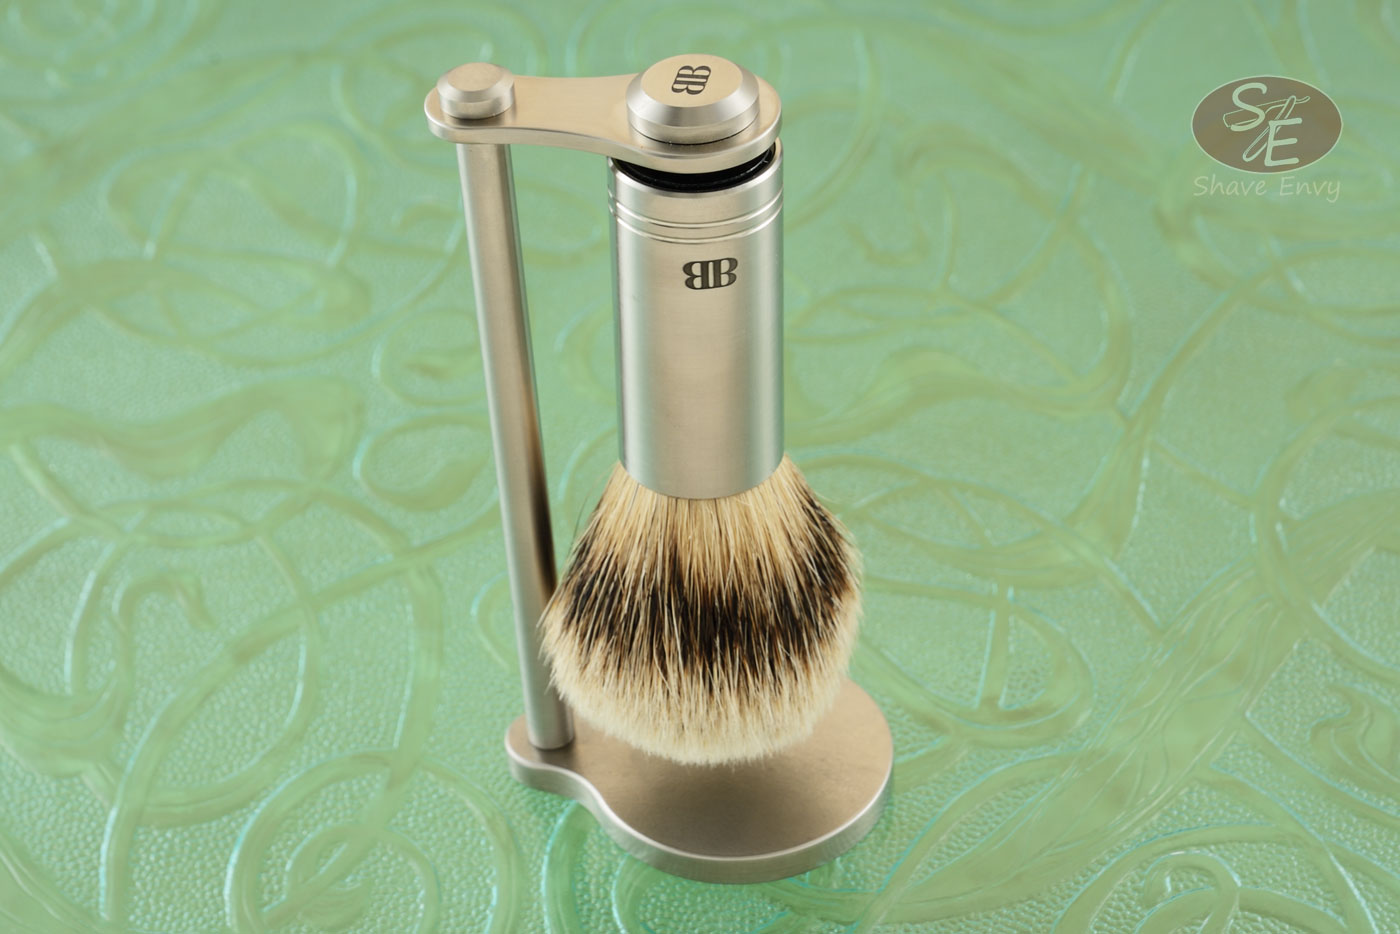 Silvertip Shaving Brush with Magnetic Stand - Brushed Stainless Steel